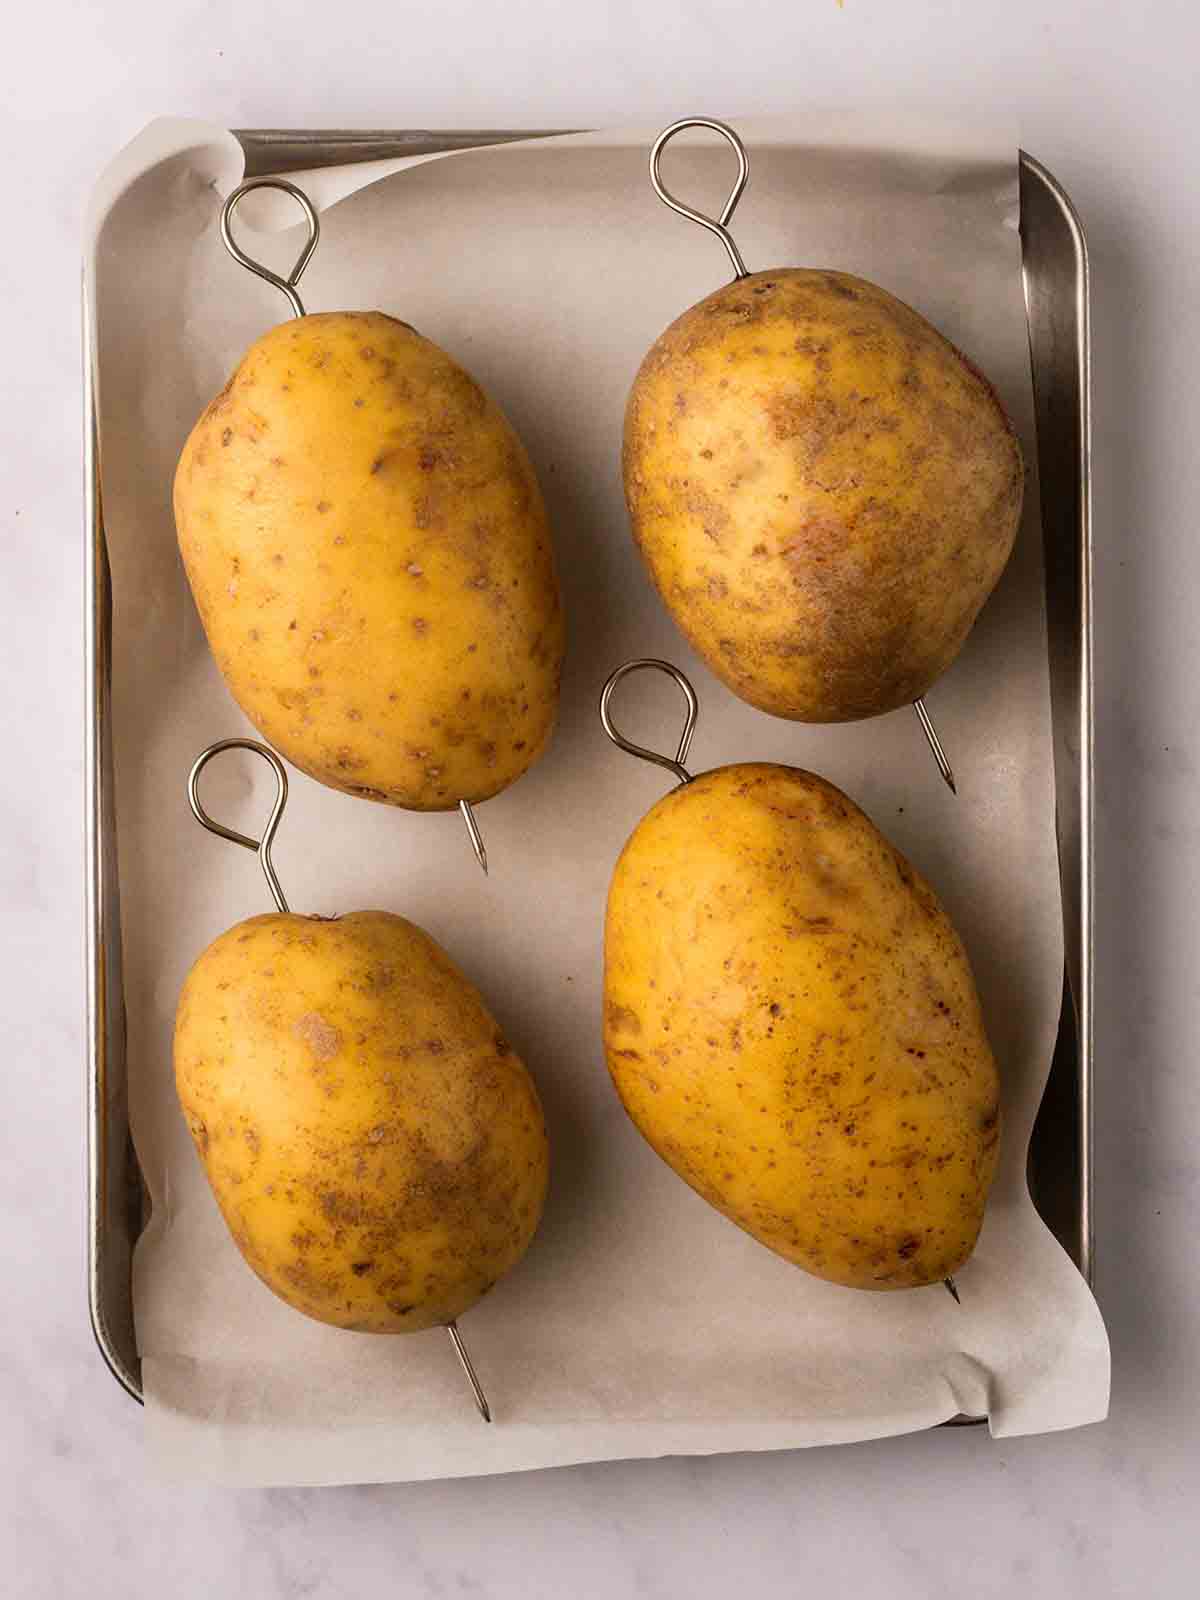 Four baked potatoes with skewers through the middle, ready to be cooked.